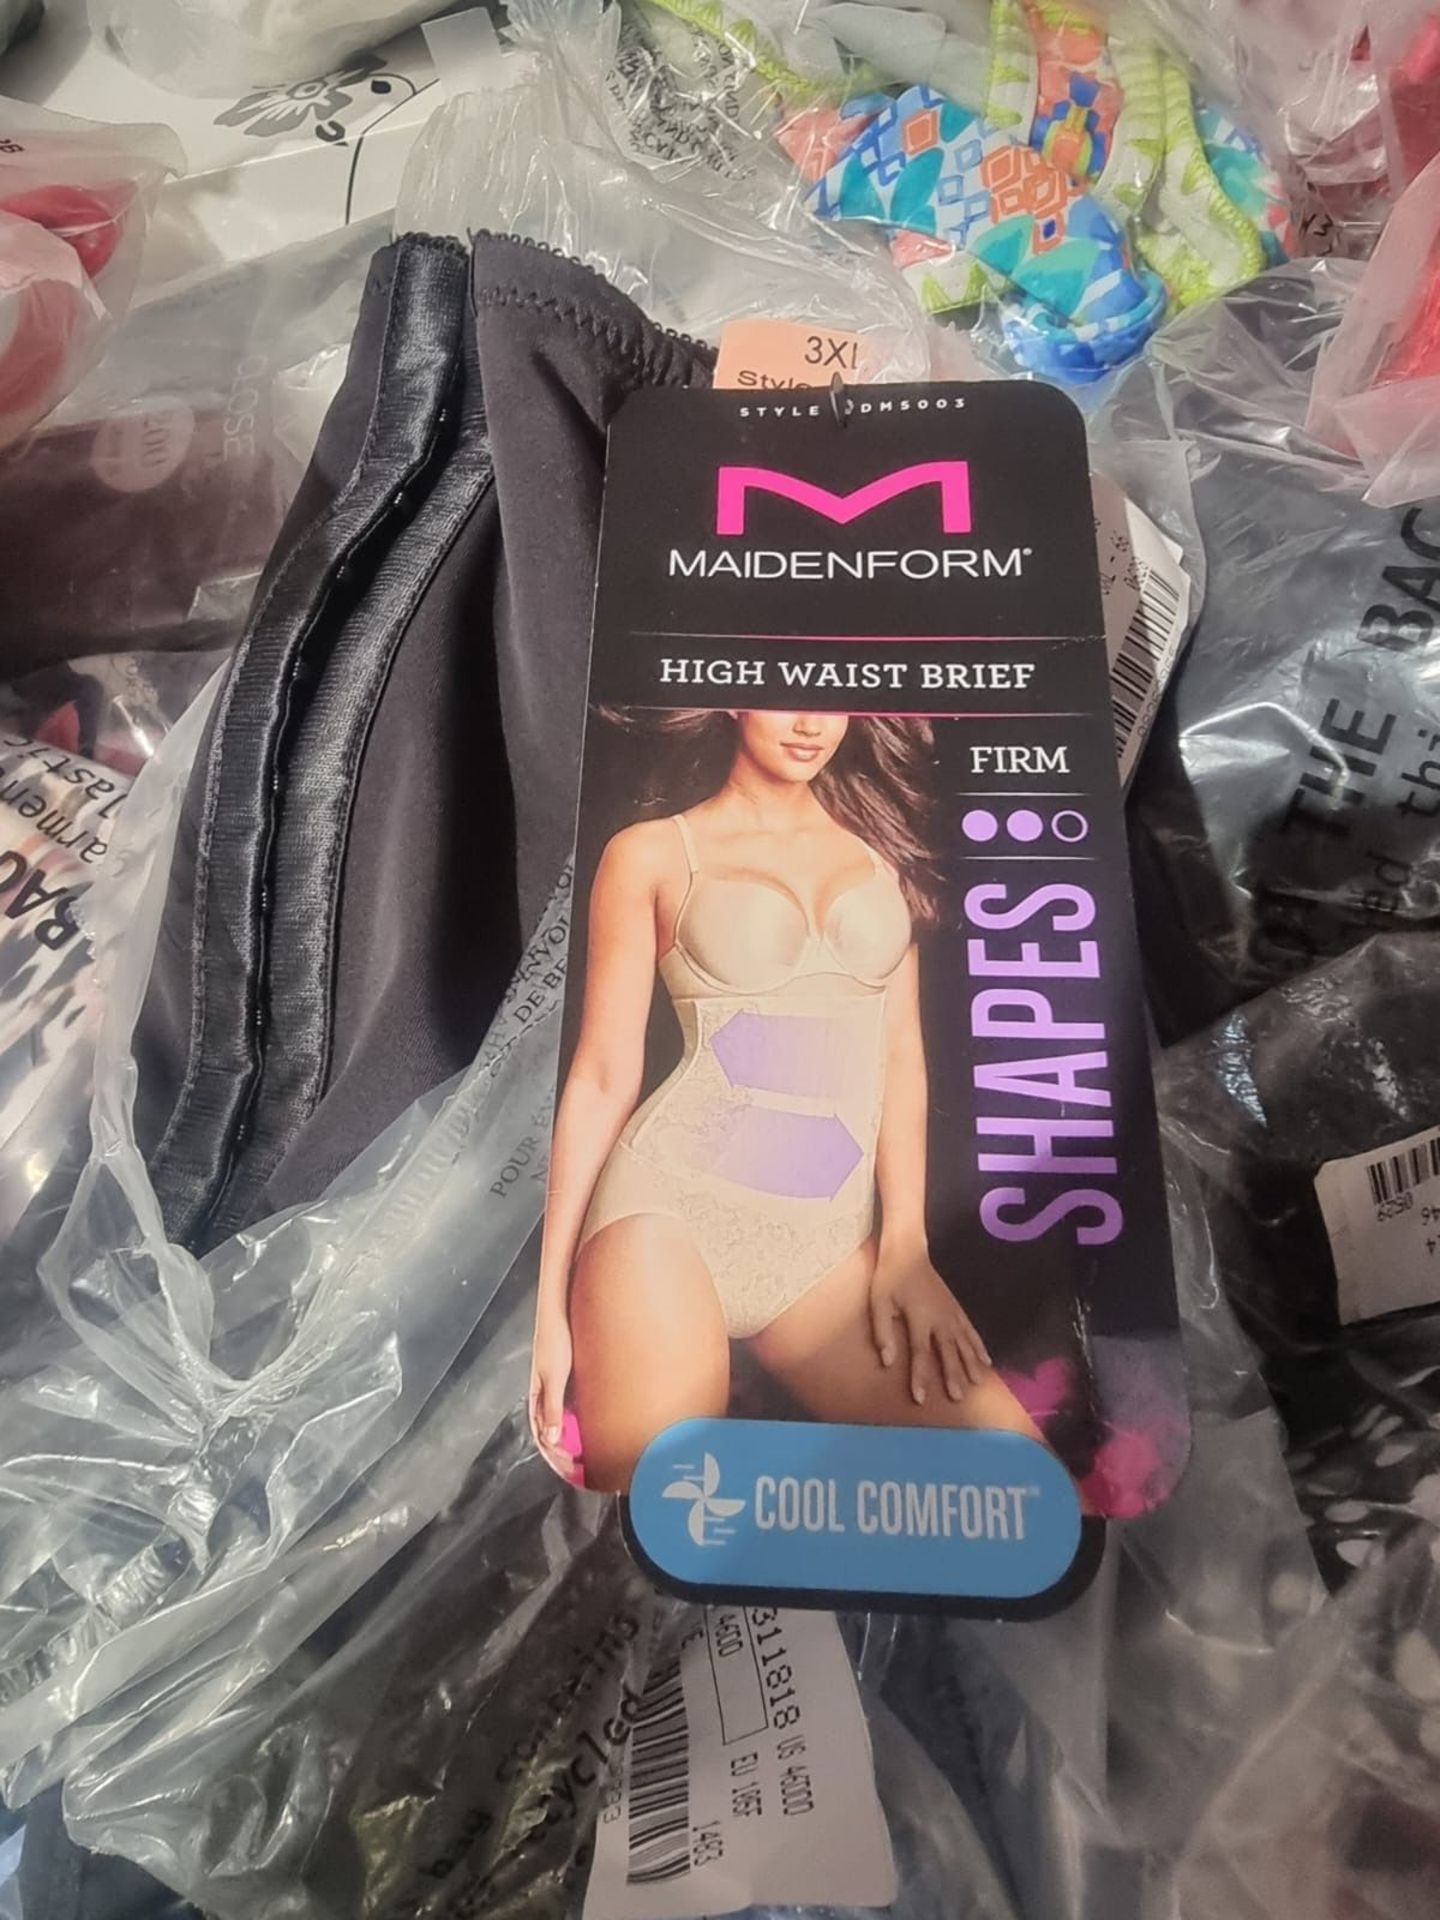 100 x NEW PACKAGED ASSORTED SWIM & UNDERWEAR FROM BRAND SUCH AS WONDERBRA, BOUX AVENUE, ANN SUMMERS, - Image 51 of 53